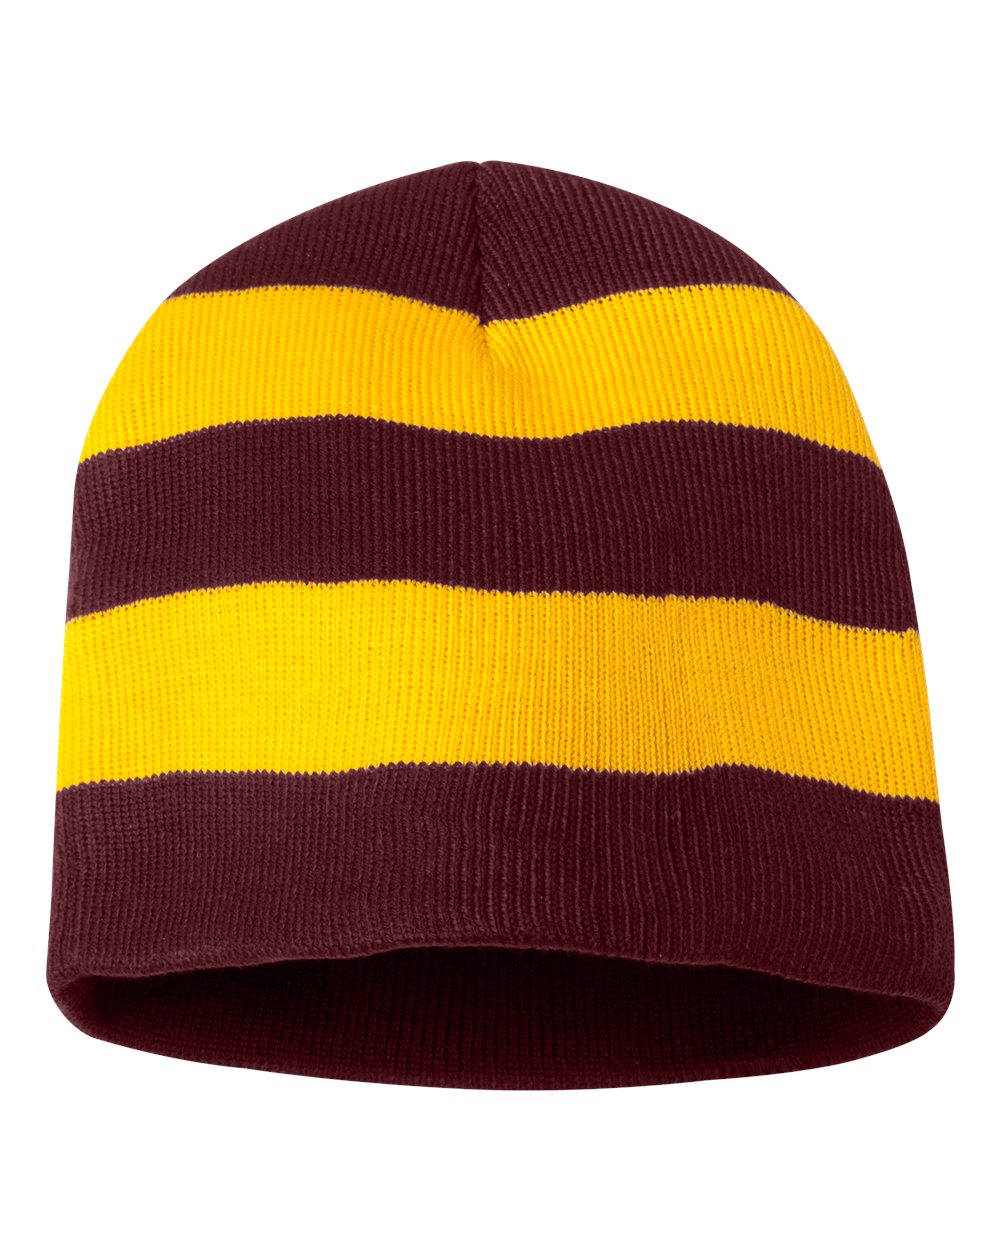 click to view Maroon/Gold